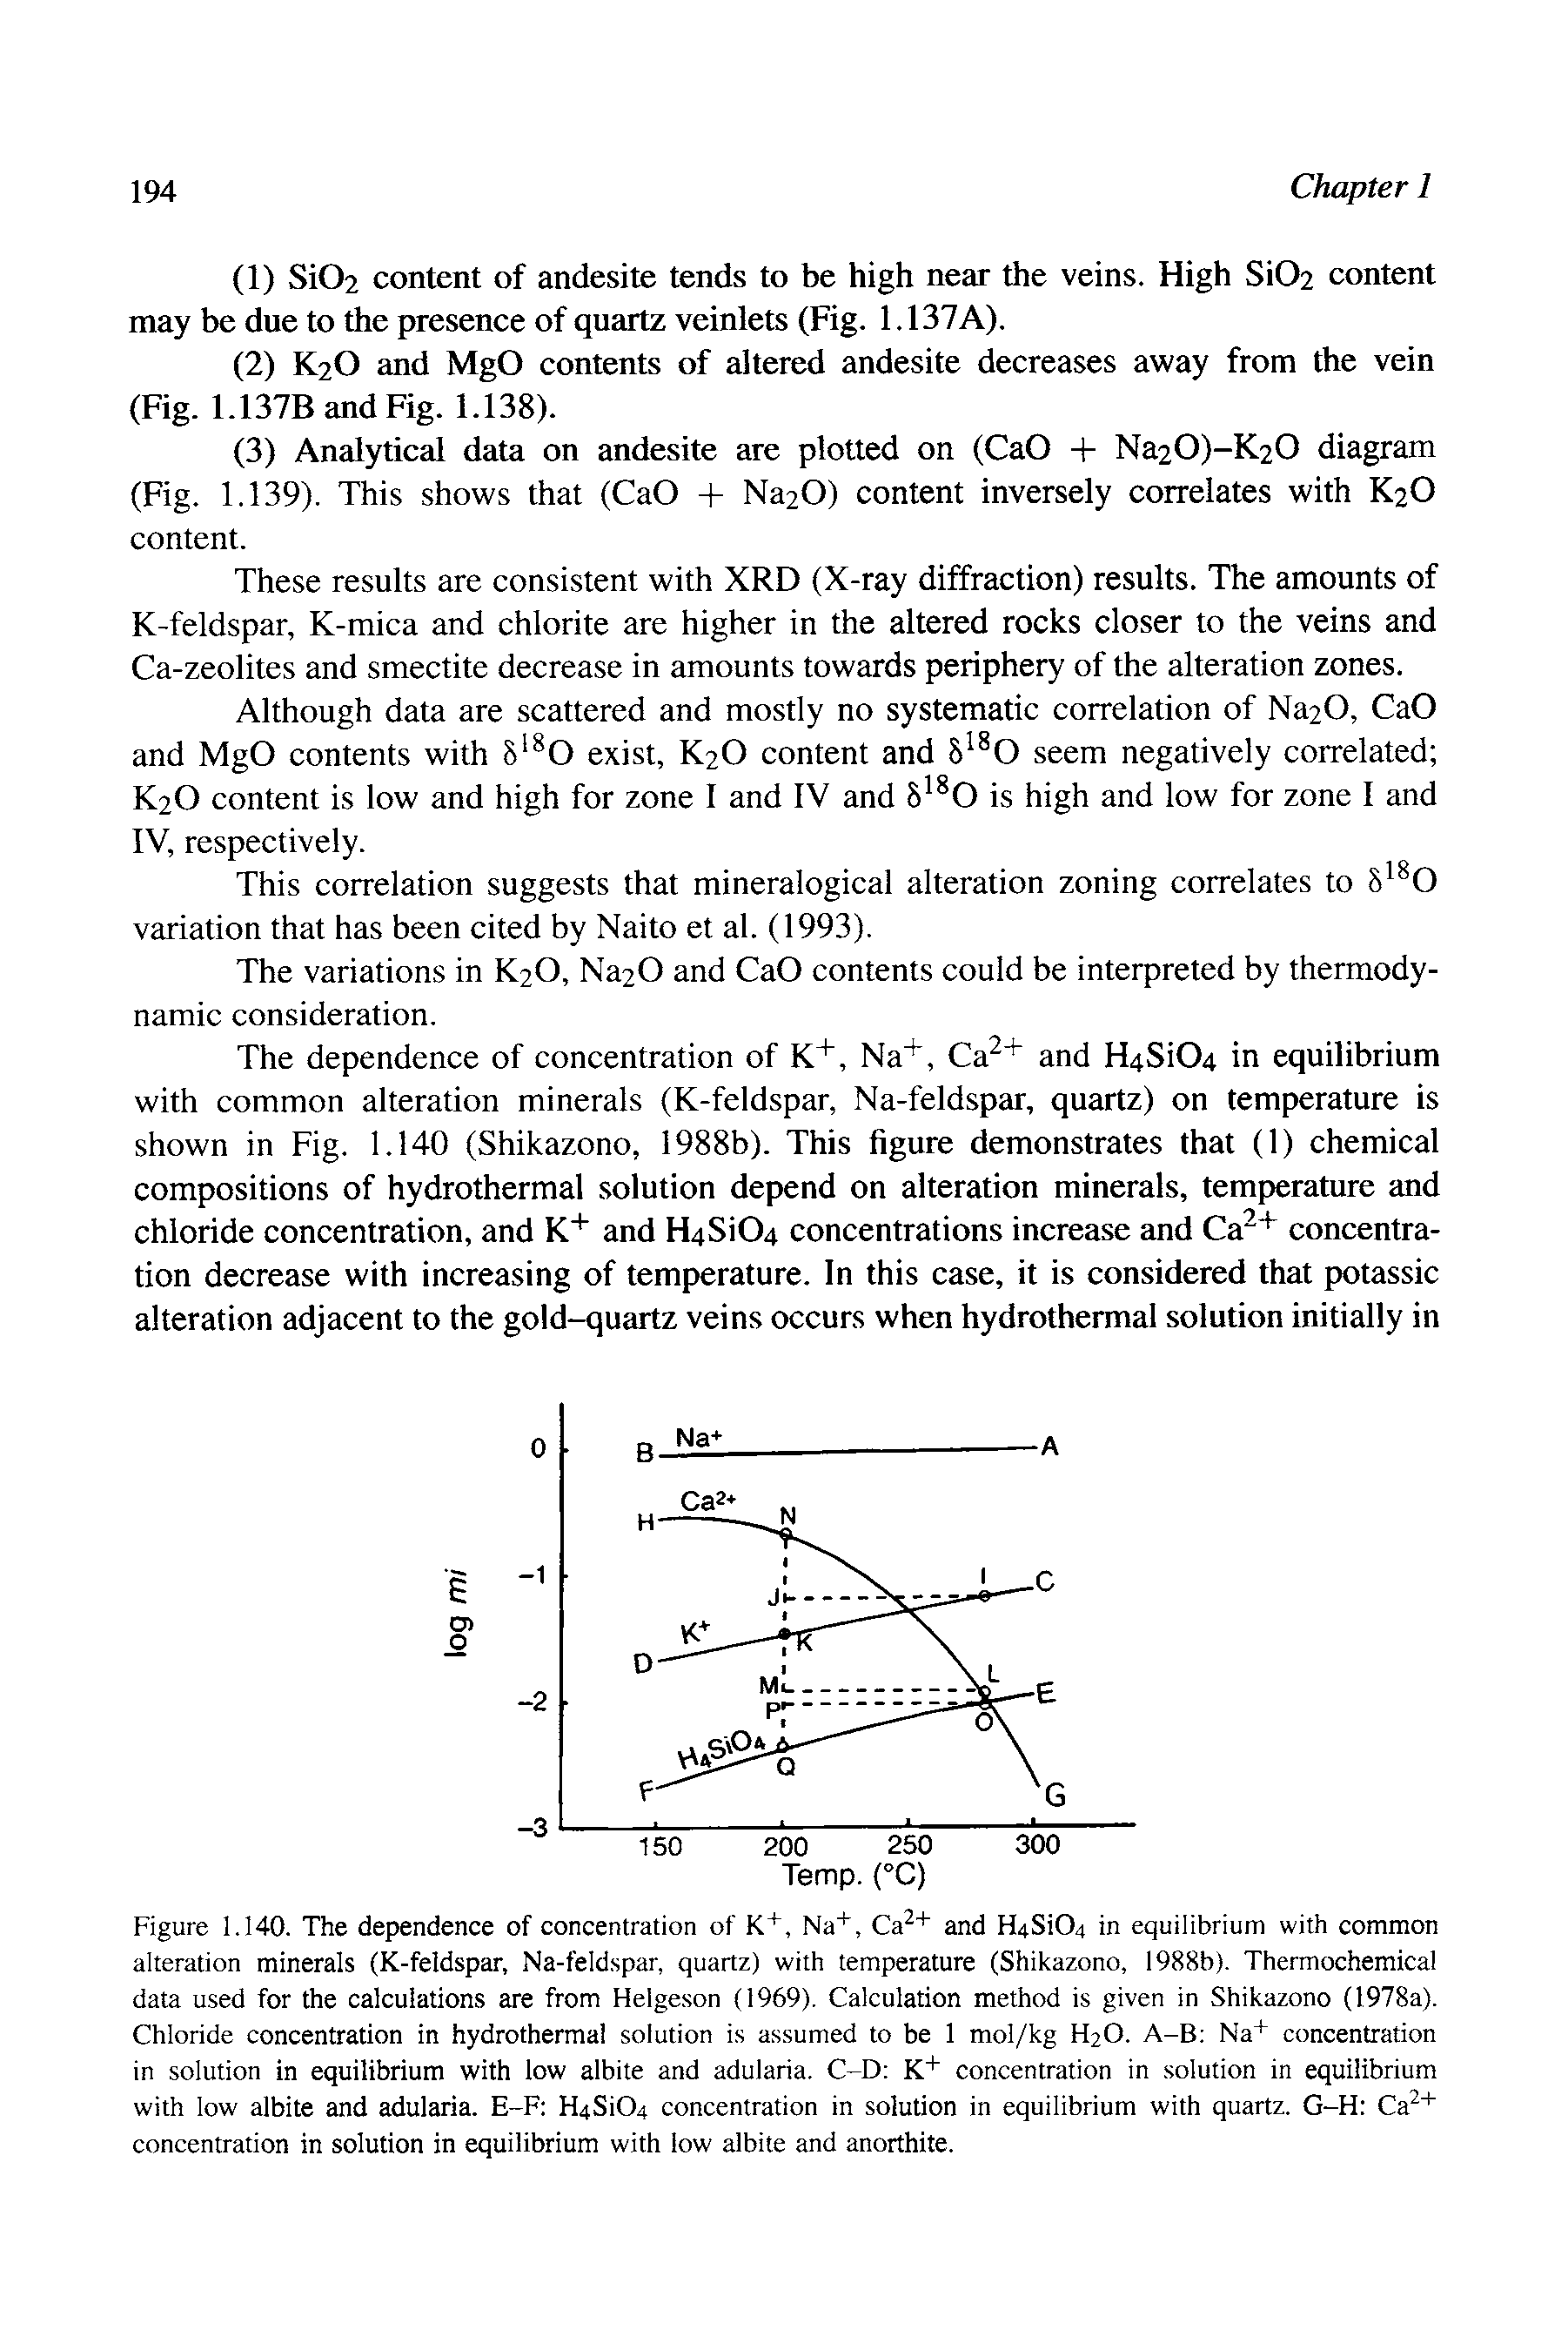 Figure 1.140. The dependence of concentration of K+, Na, Ca + and HaSiOa in equilibrium with common alteration minerals (K-feldspar, Na-feldspar, quartz) with temperature (Shikazono, 1988b). Thermochemical data used for the calculations are from Helgeson (1969). Calculation method is given in Shikazono (1978a). Chloride concentration in hydrothermal solution is assumed to be 1 mol/kg H2O. A-B Na+ concentration in solution in equilibrium with low albite and adularia. C-D K+ concentration in solution in equilibrium with low albite and adularia. E-F H4Si04 concentration in solution in equilibrium with quartz. G-H Ca " " concentration in solution in equilibrium with low albite and anorthite.